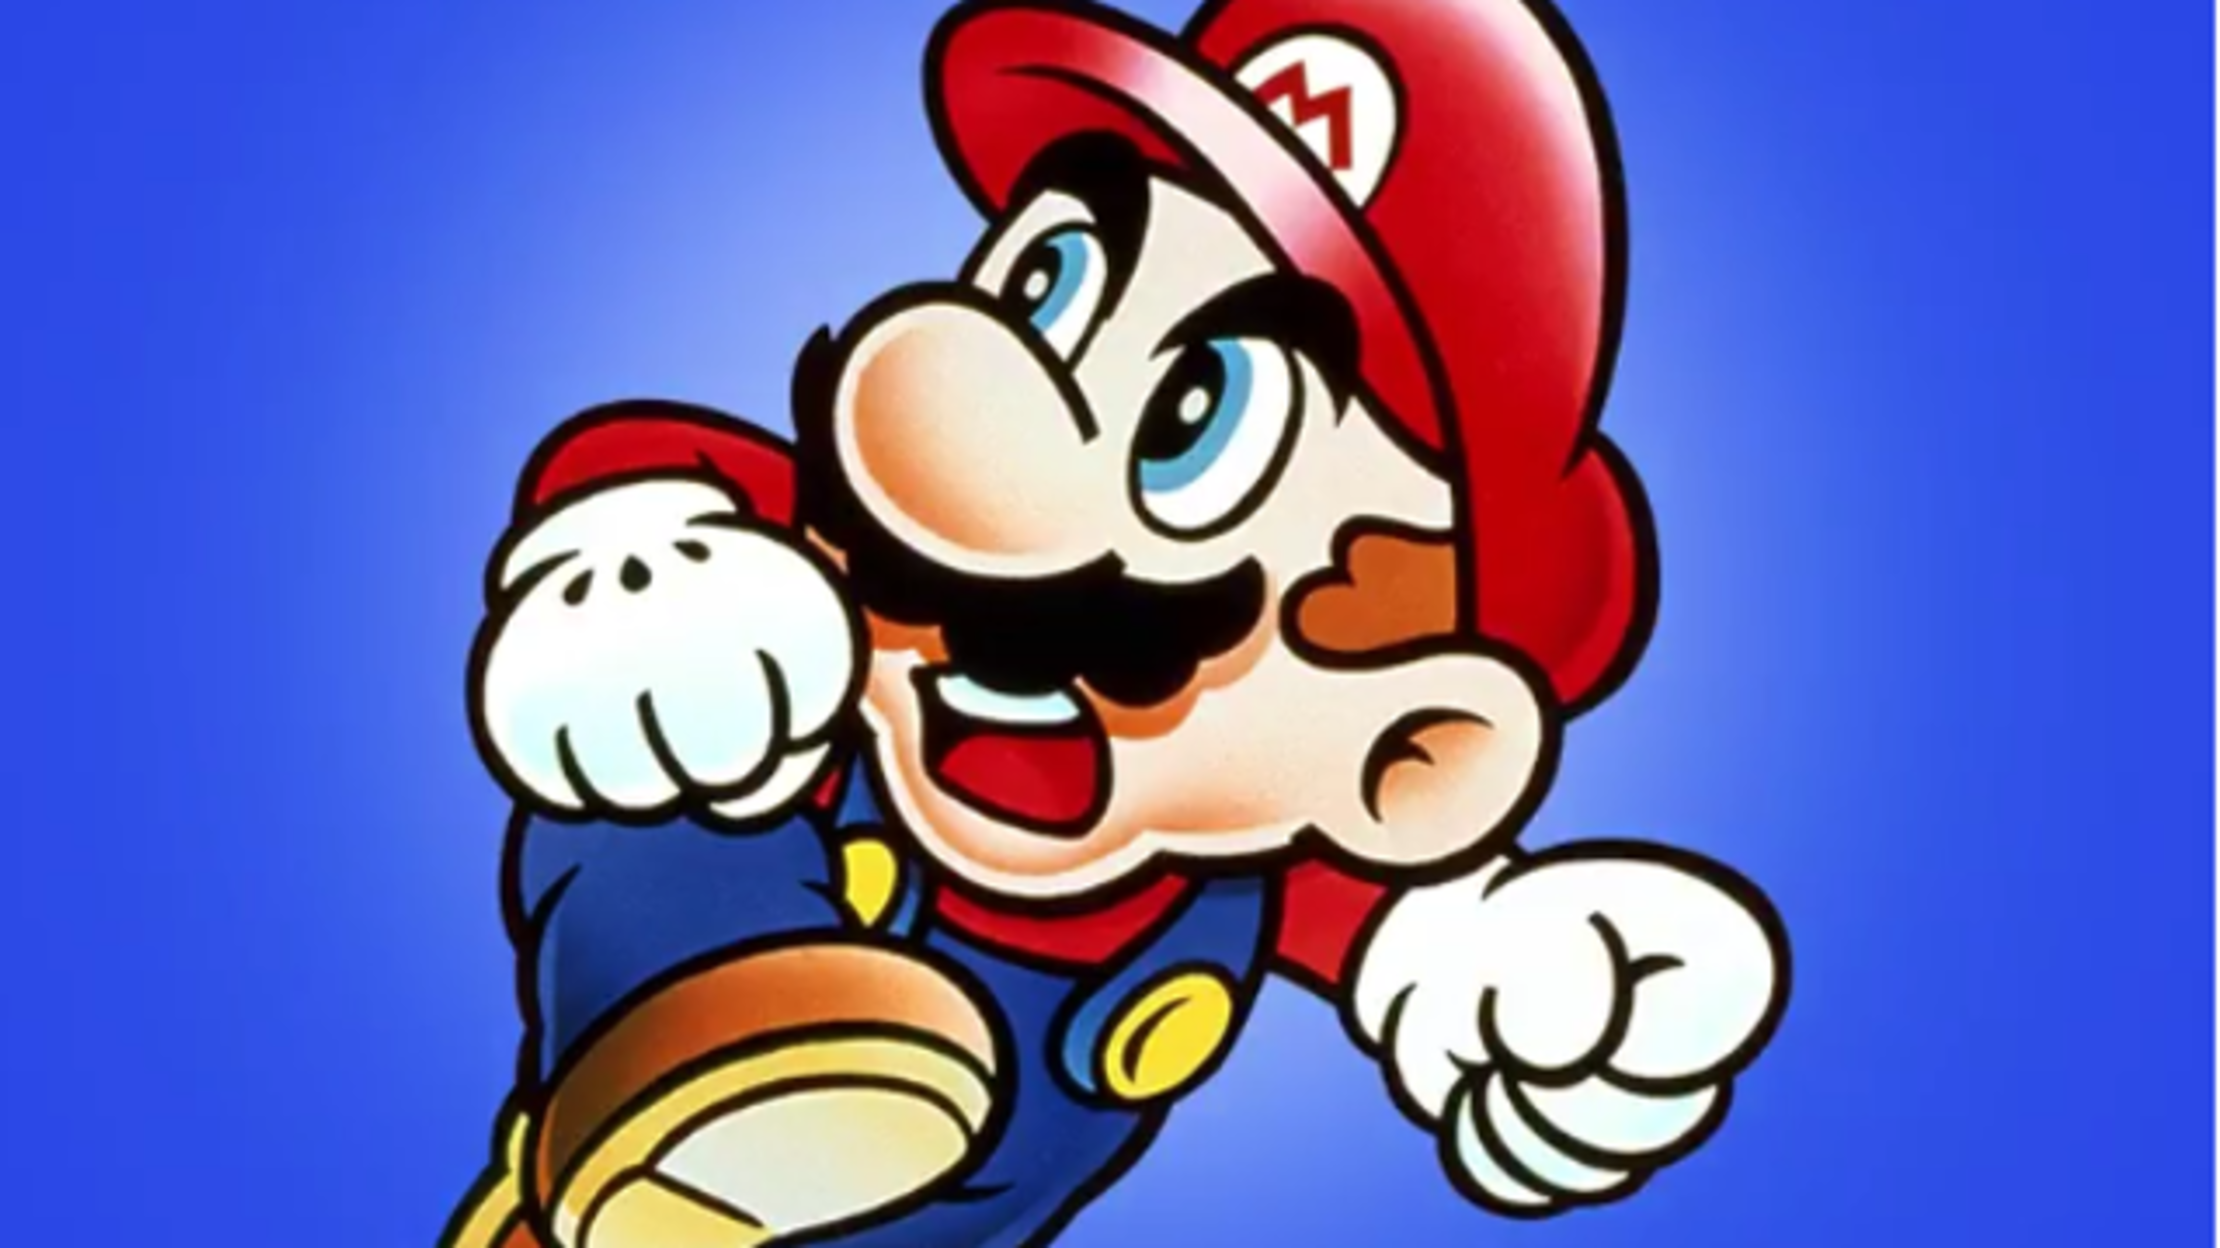 The Artist Who Helped Bring Super Mario To Life Mental Floss 1758